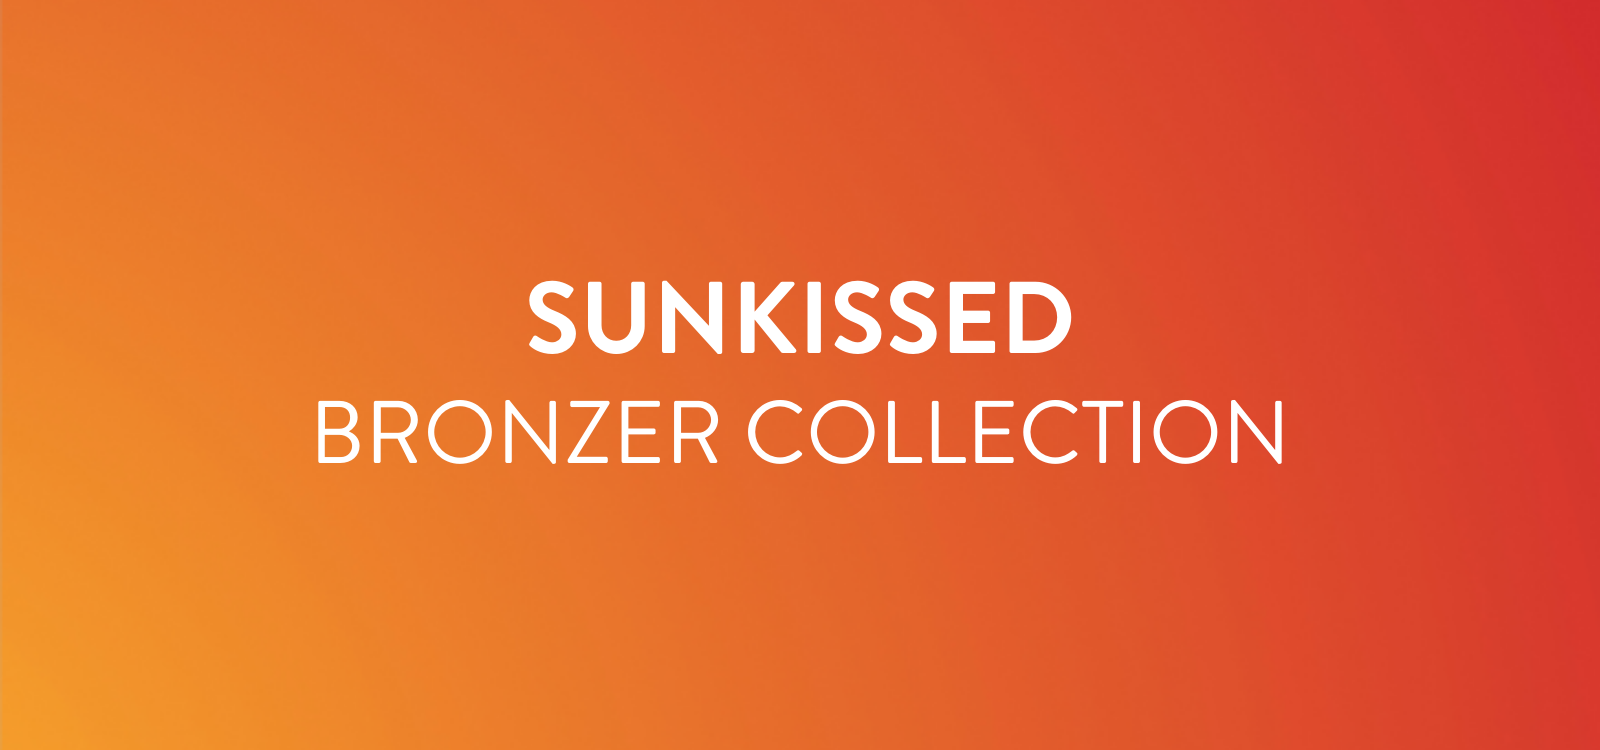 Introducing Our Sunkissed Bronzer Collection